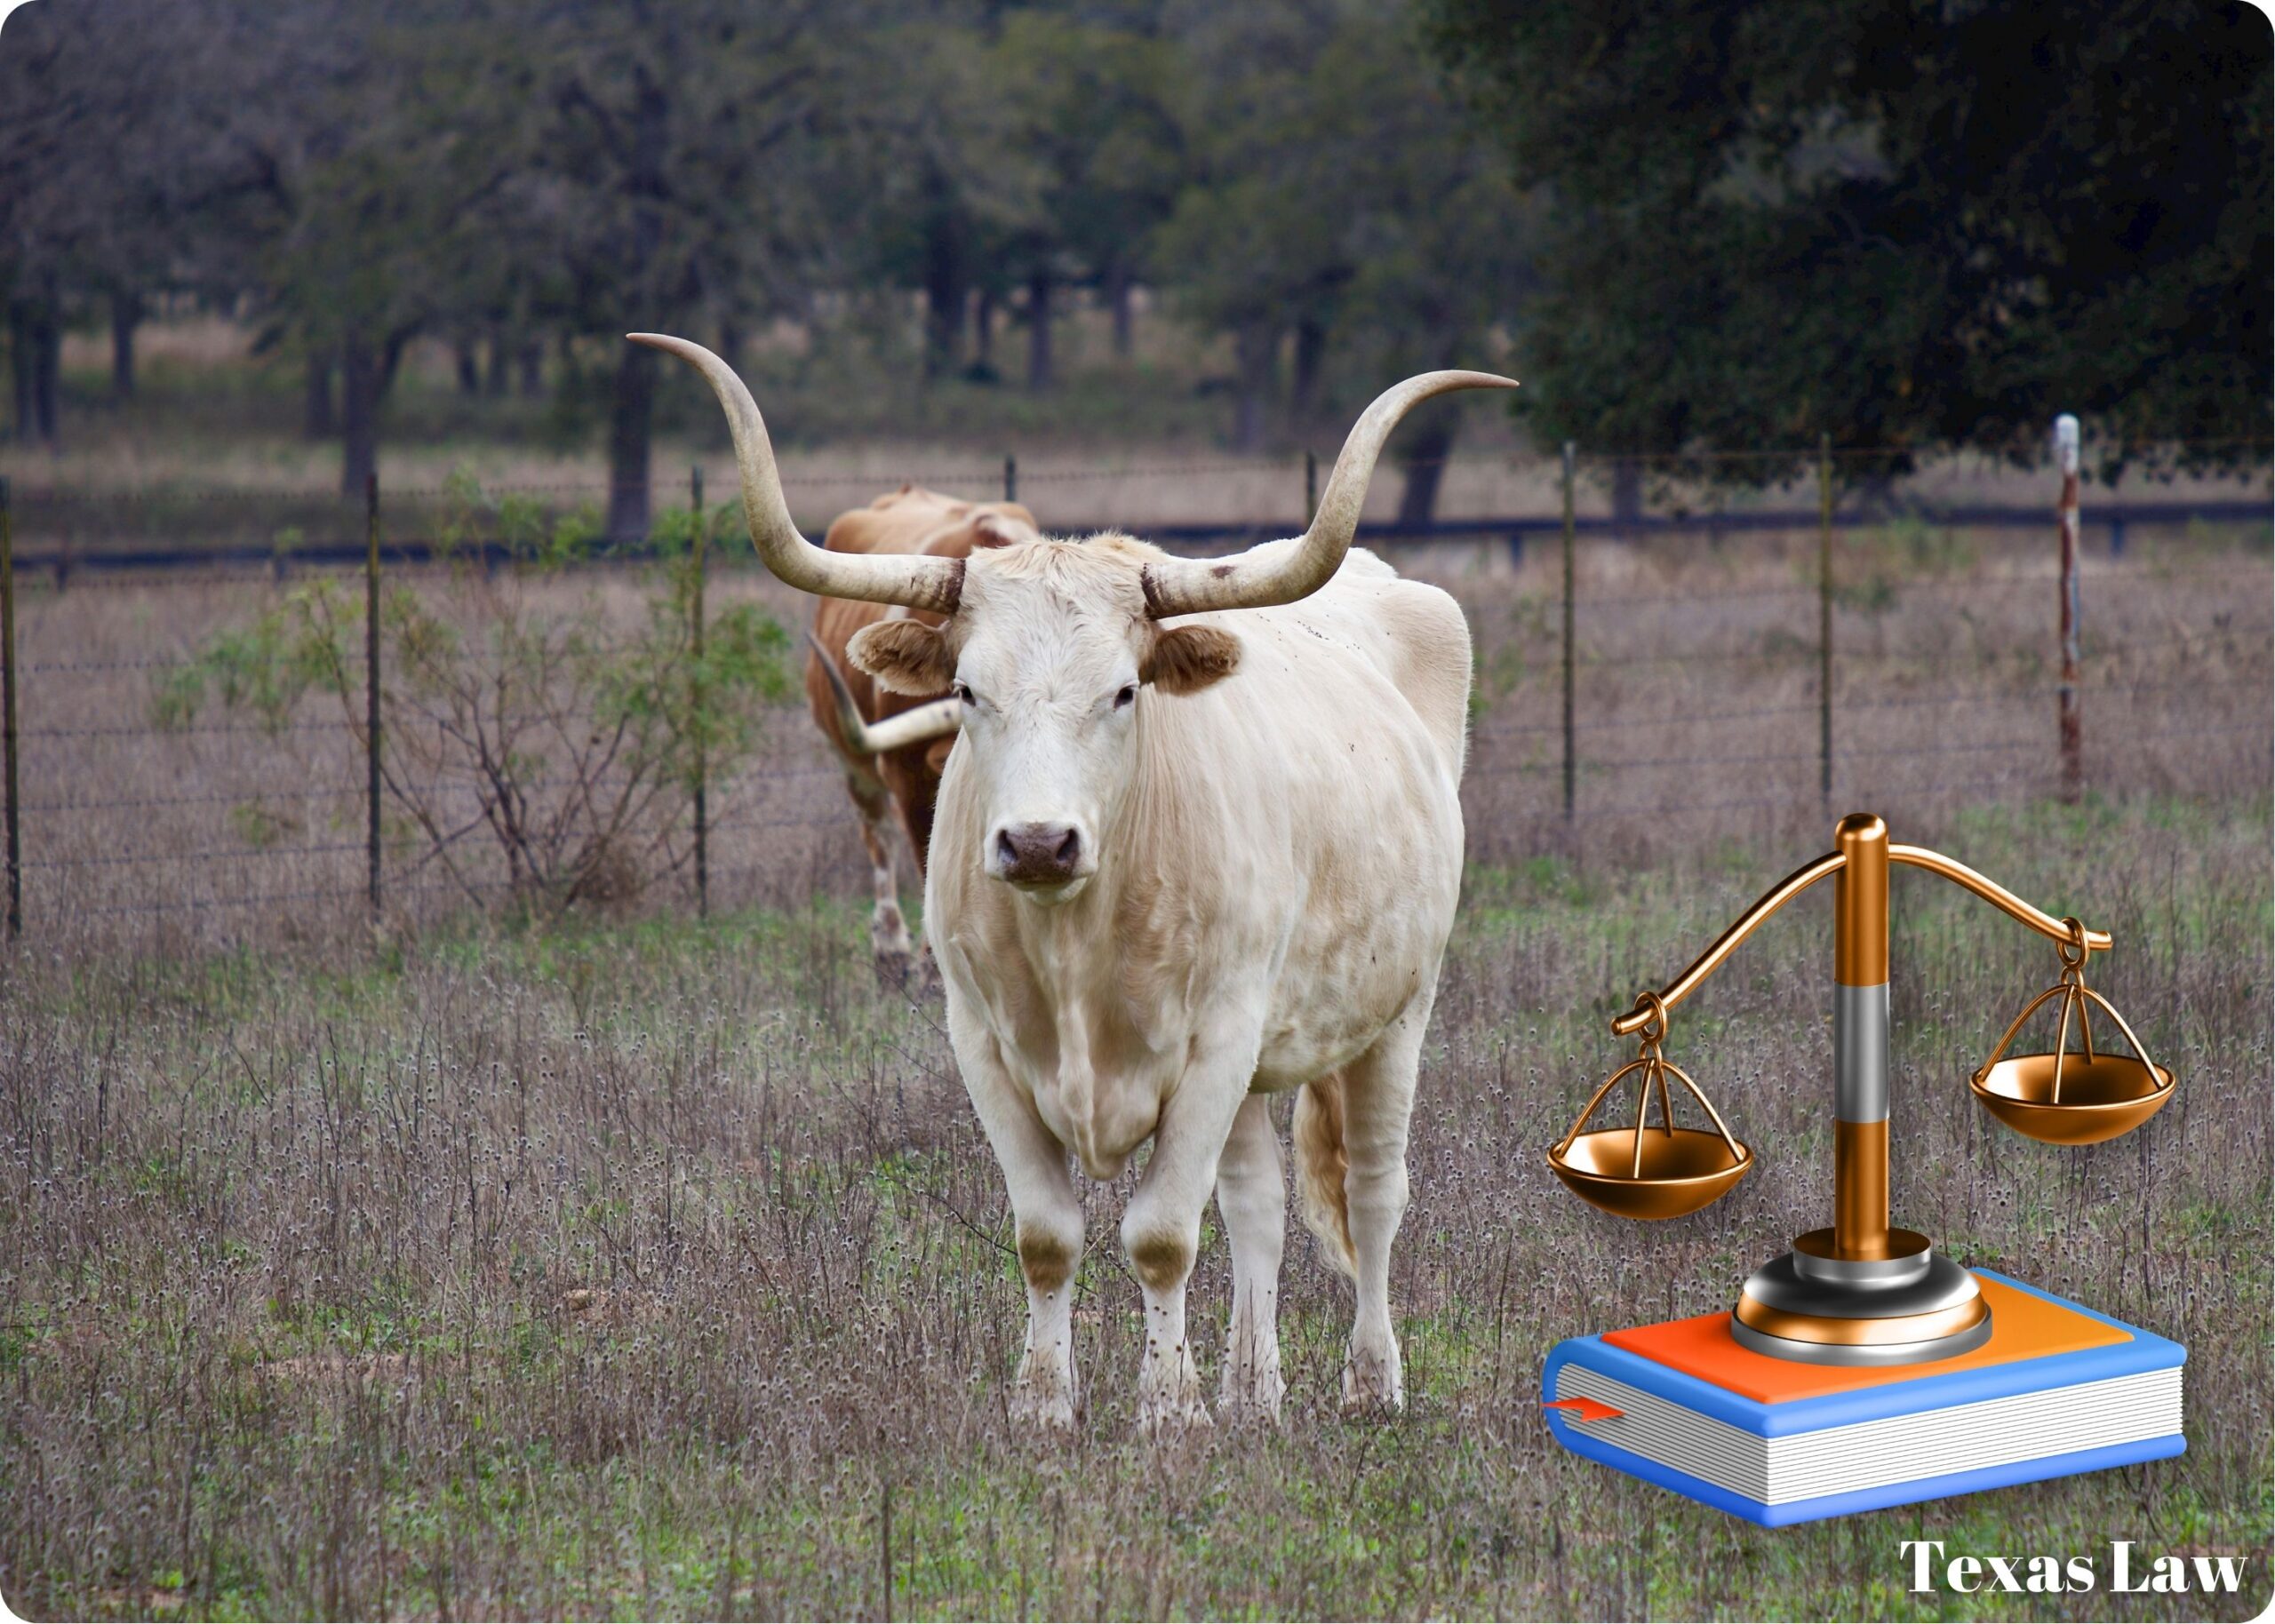 Iconic Texas Longhorn cow against a backdrop of the vast Texas landscape, symbolizing the unique legal terrain of Texas foreclosure laws.